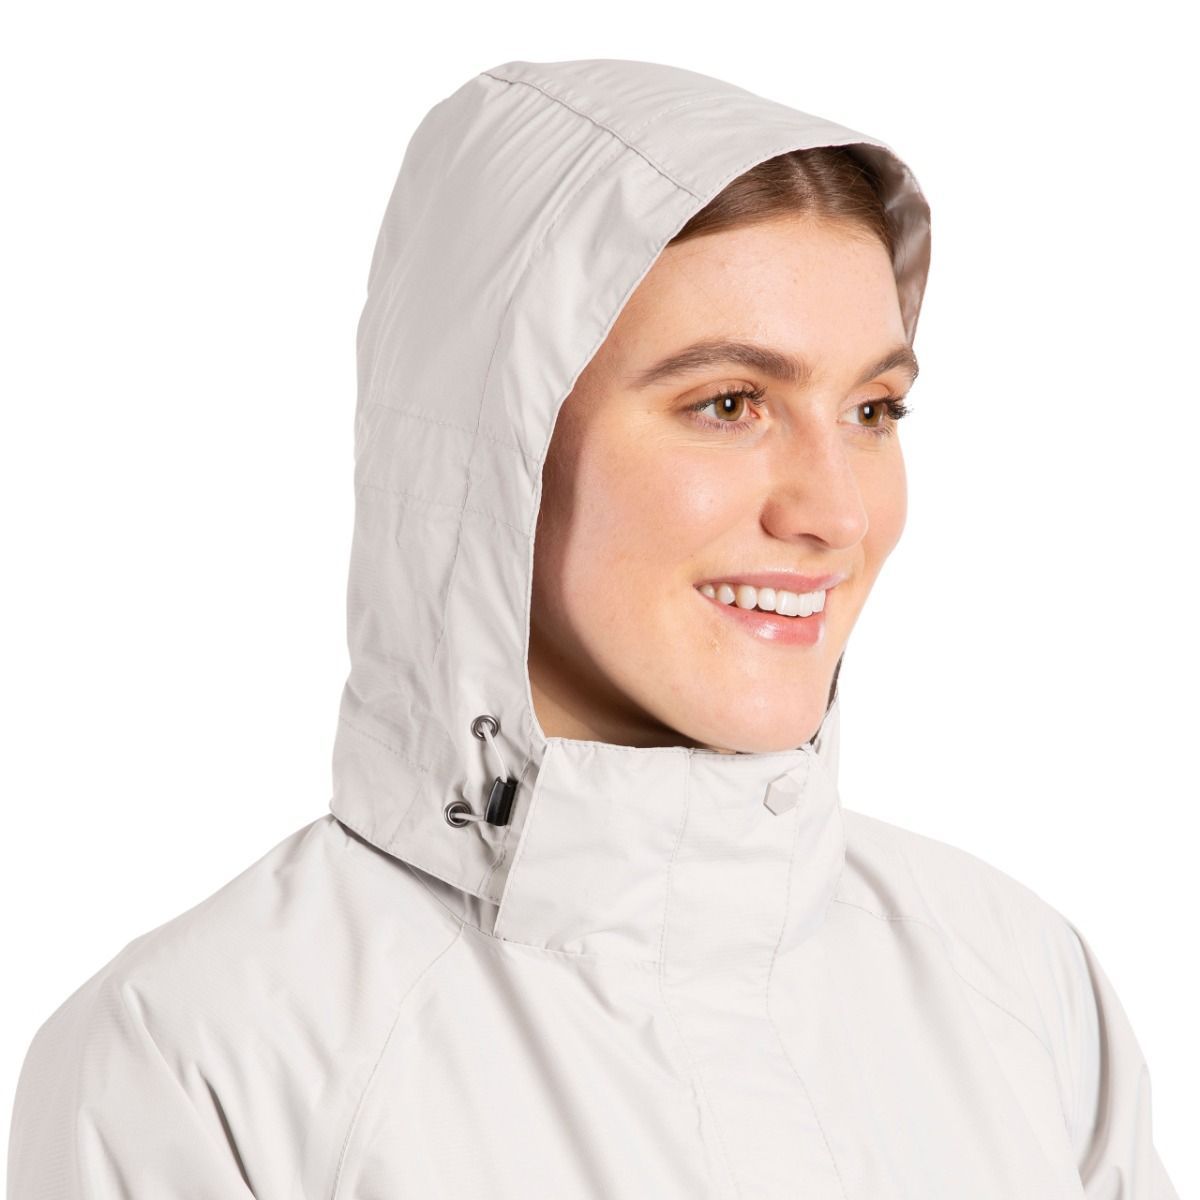 Shell jacket. Jaquard honeycomb mini ripstop. Adjustable zip off hood. 2 waterproof zip pockets. 1 inner zip pocket. Double storm flaps. Adjustable shaped cuffs. Adjustable drawcord at hem and collar. Waterproof 5000mm, breathable 5000mvp, windproof, taped seams. Shell: 100% Polyester, TPU membrane, Lining: 100% Polyester. Trespass Womens Chest Sizing (approx): XS/8 - 32in/81cm, S/10 - 34in/86cm, M/12 - 36in/91.4cm, L/14 - 38in/96.5cm, XL/16 - 40in/101.5cm, XXL/18 - 42in/106.5cm.